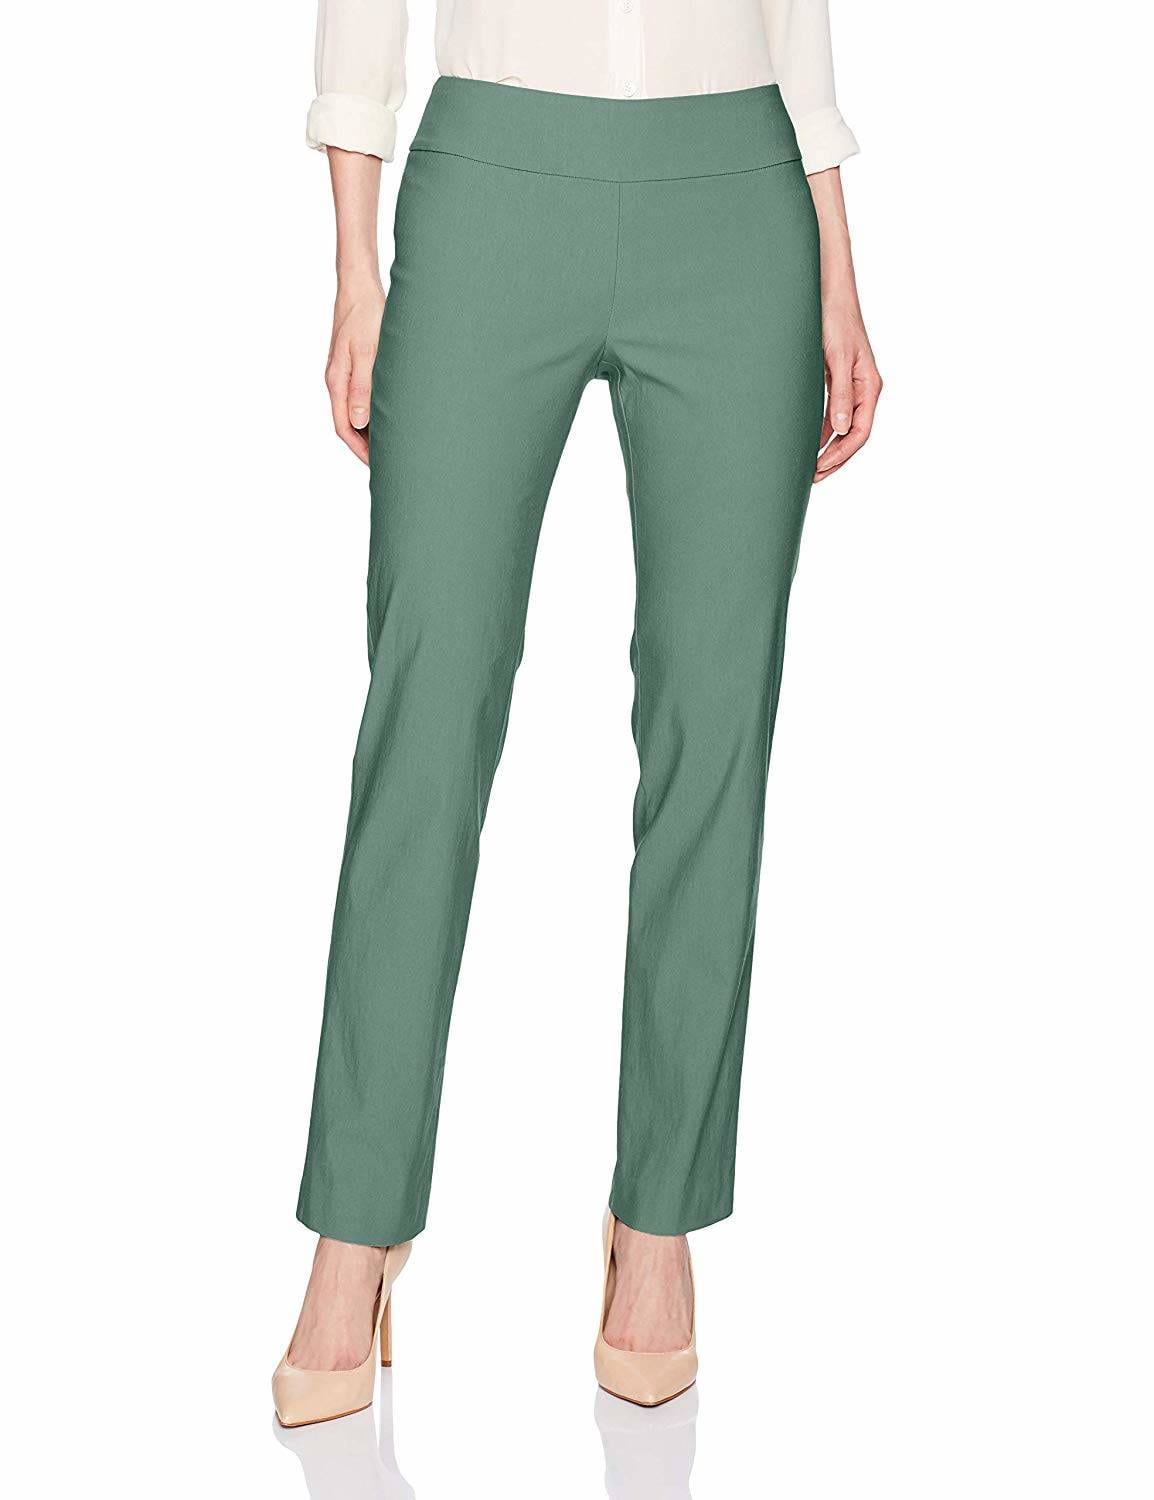 green pant for women